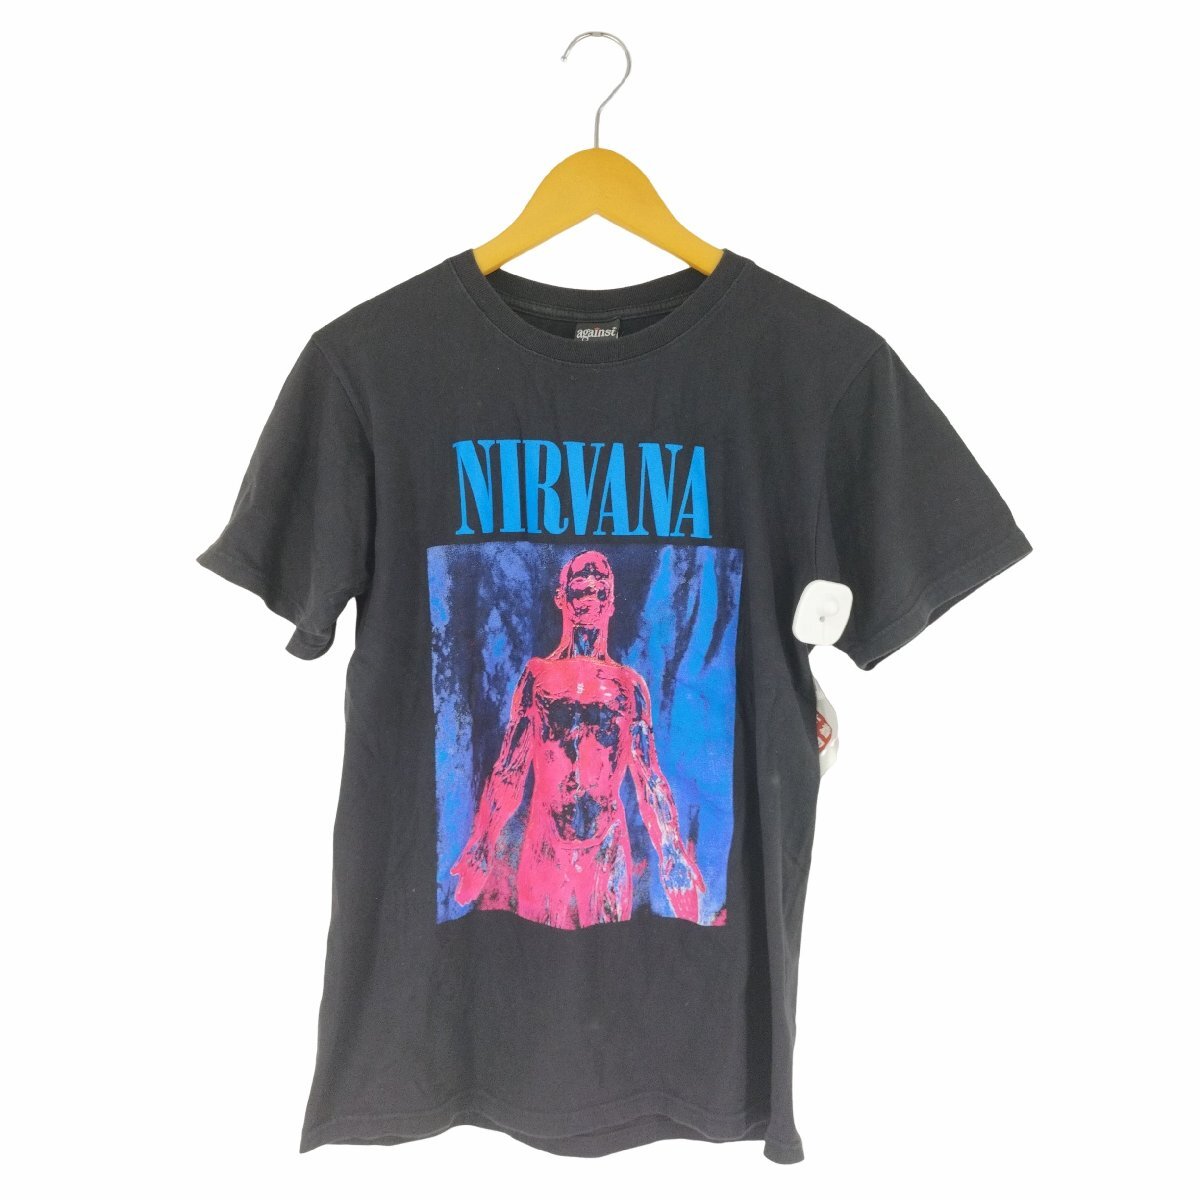 USED古着(ユーズドフルギ) AGAINST 両面プリント S/S Tシャツ メンズ impor 中古 古着 0247_画像1